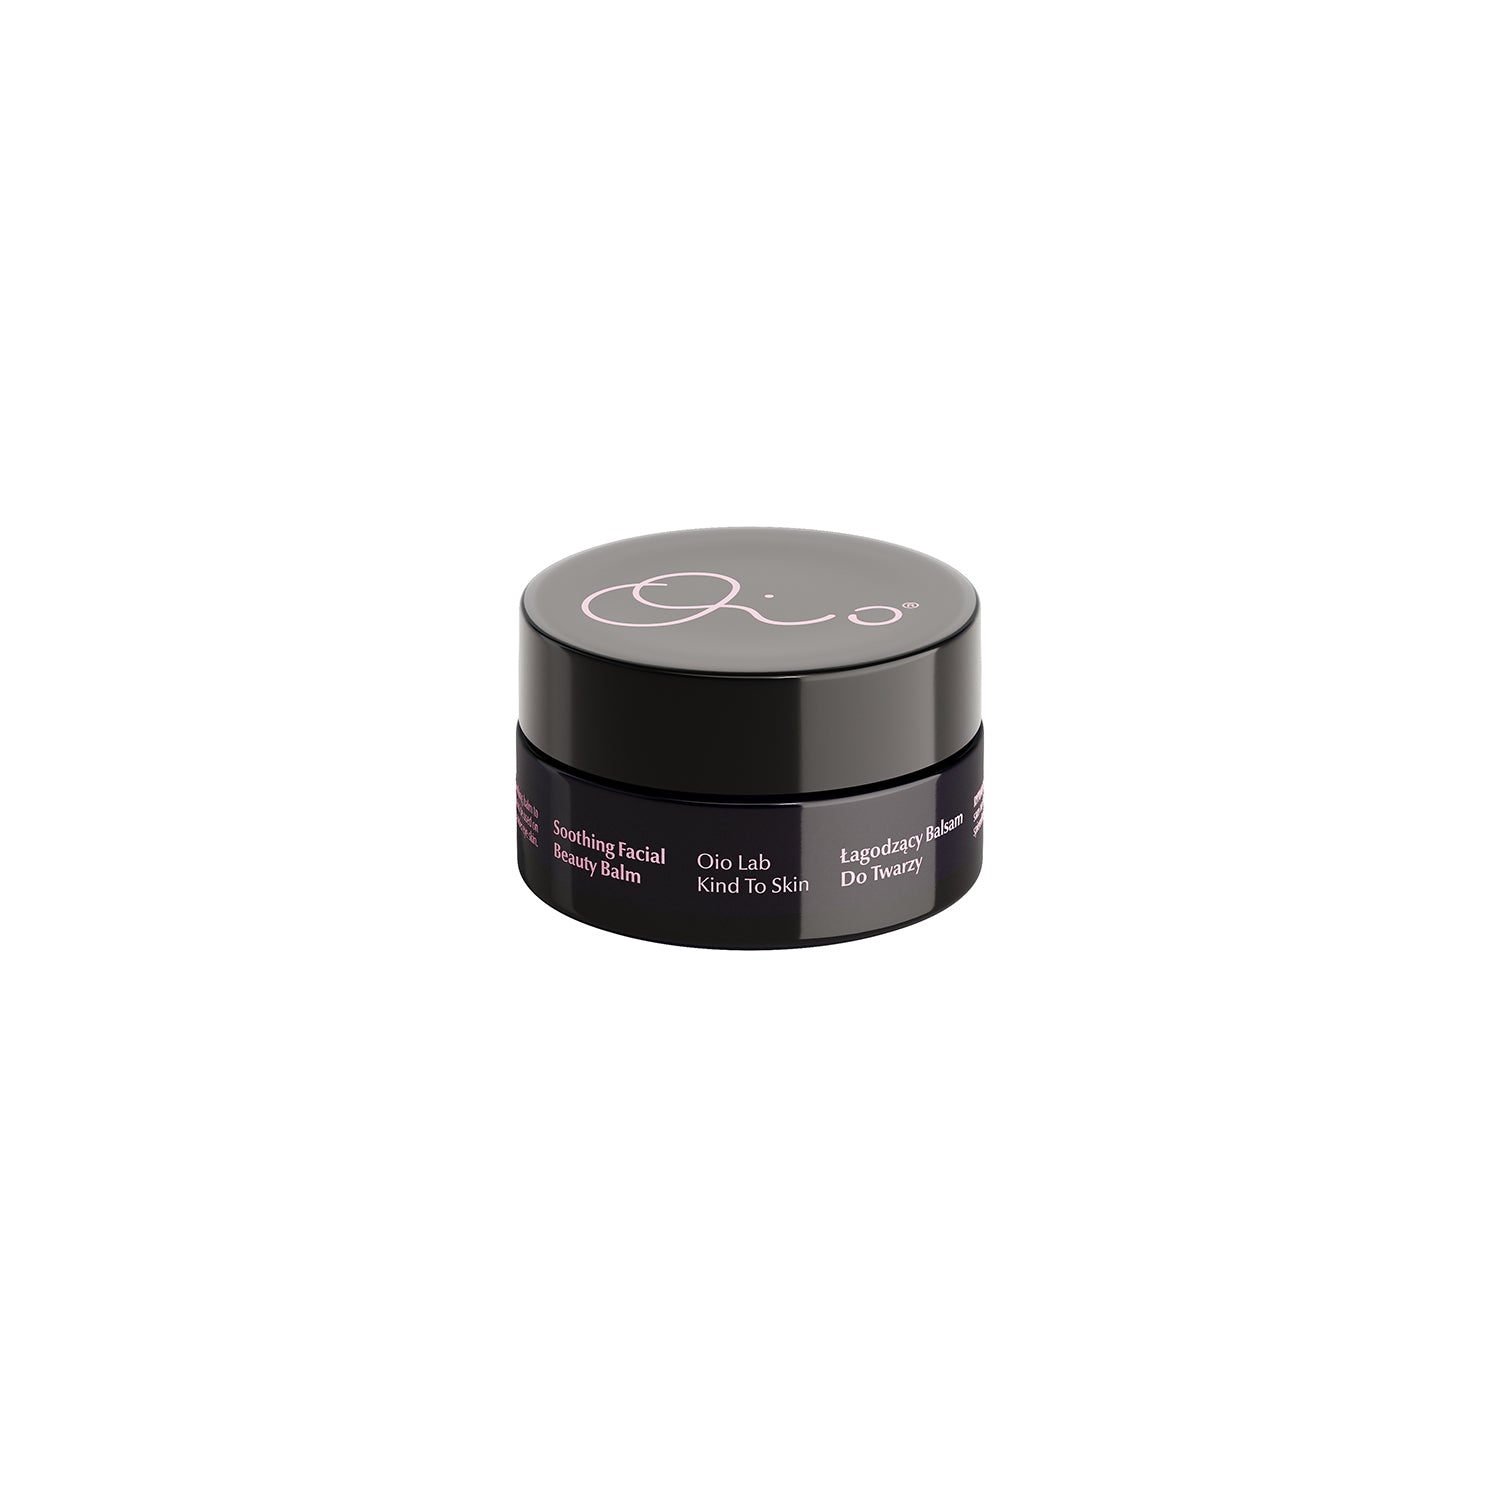 OIO LAB Kind To Skin Soothing Facial Beauty Balm